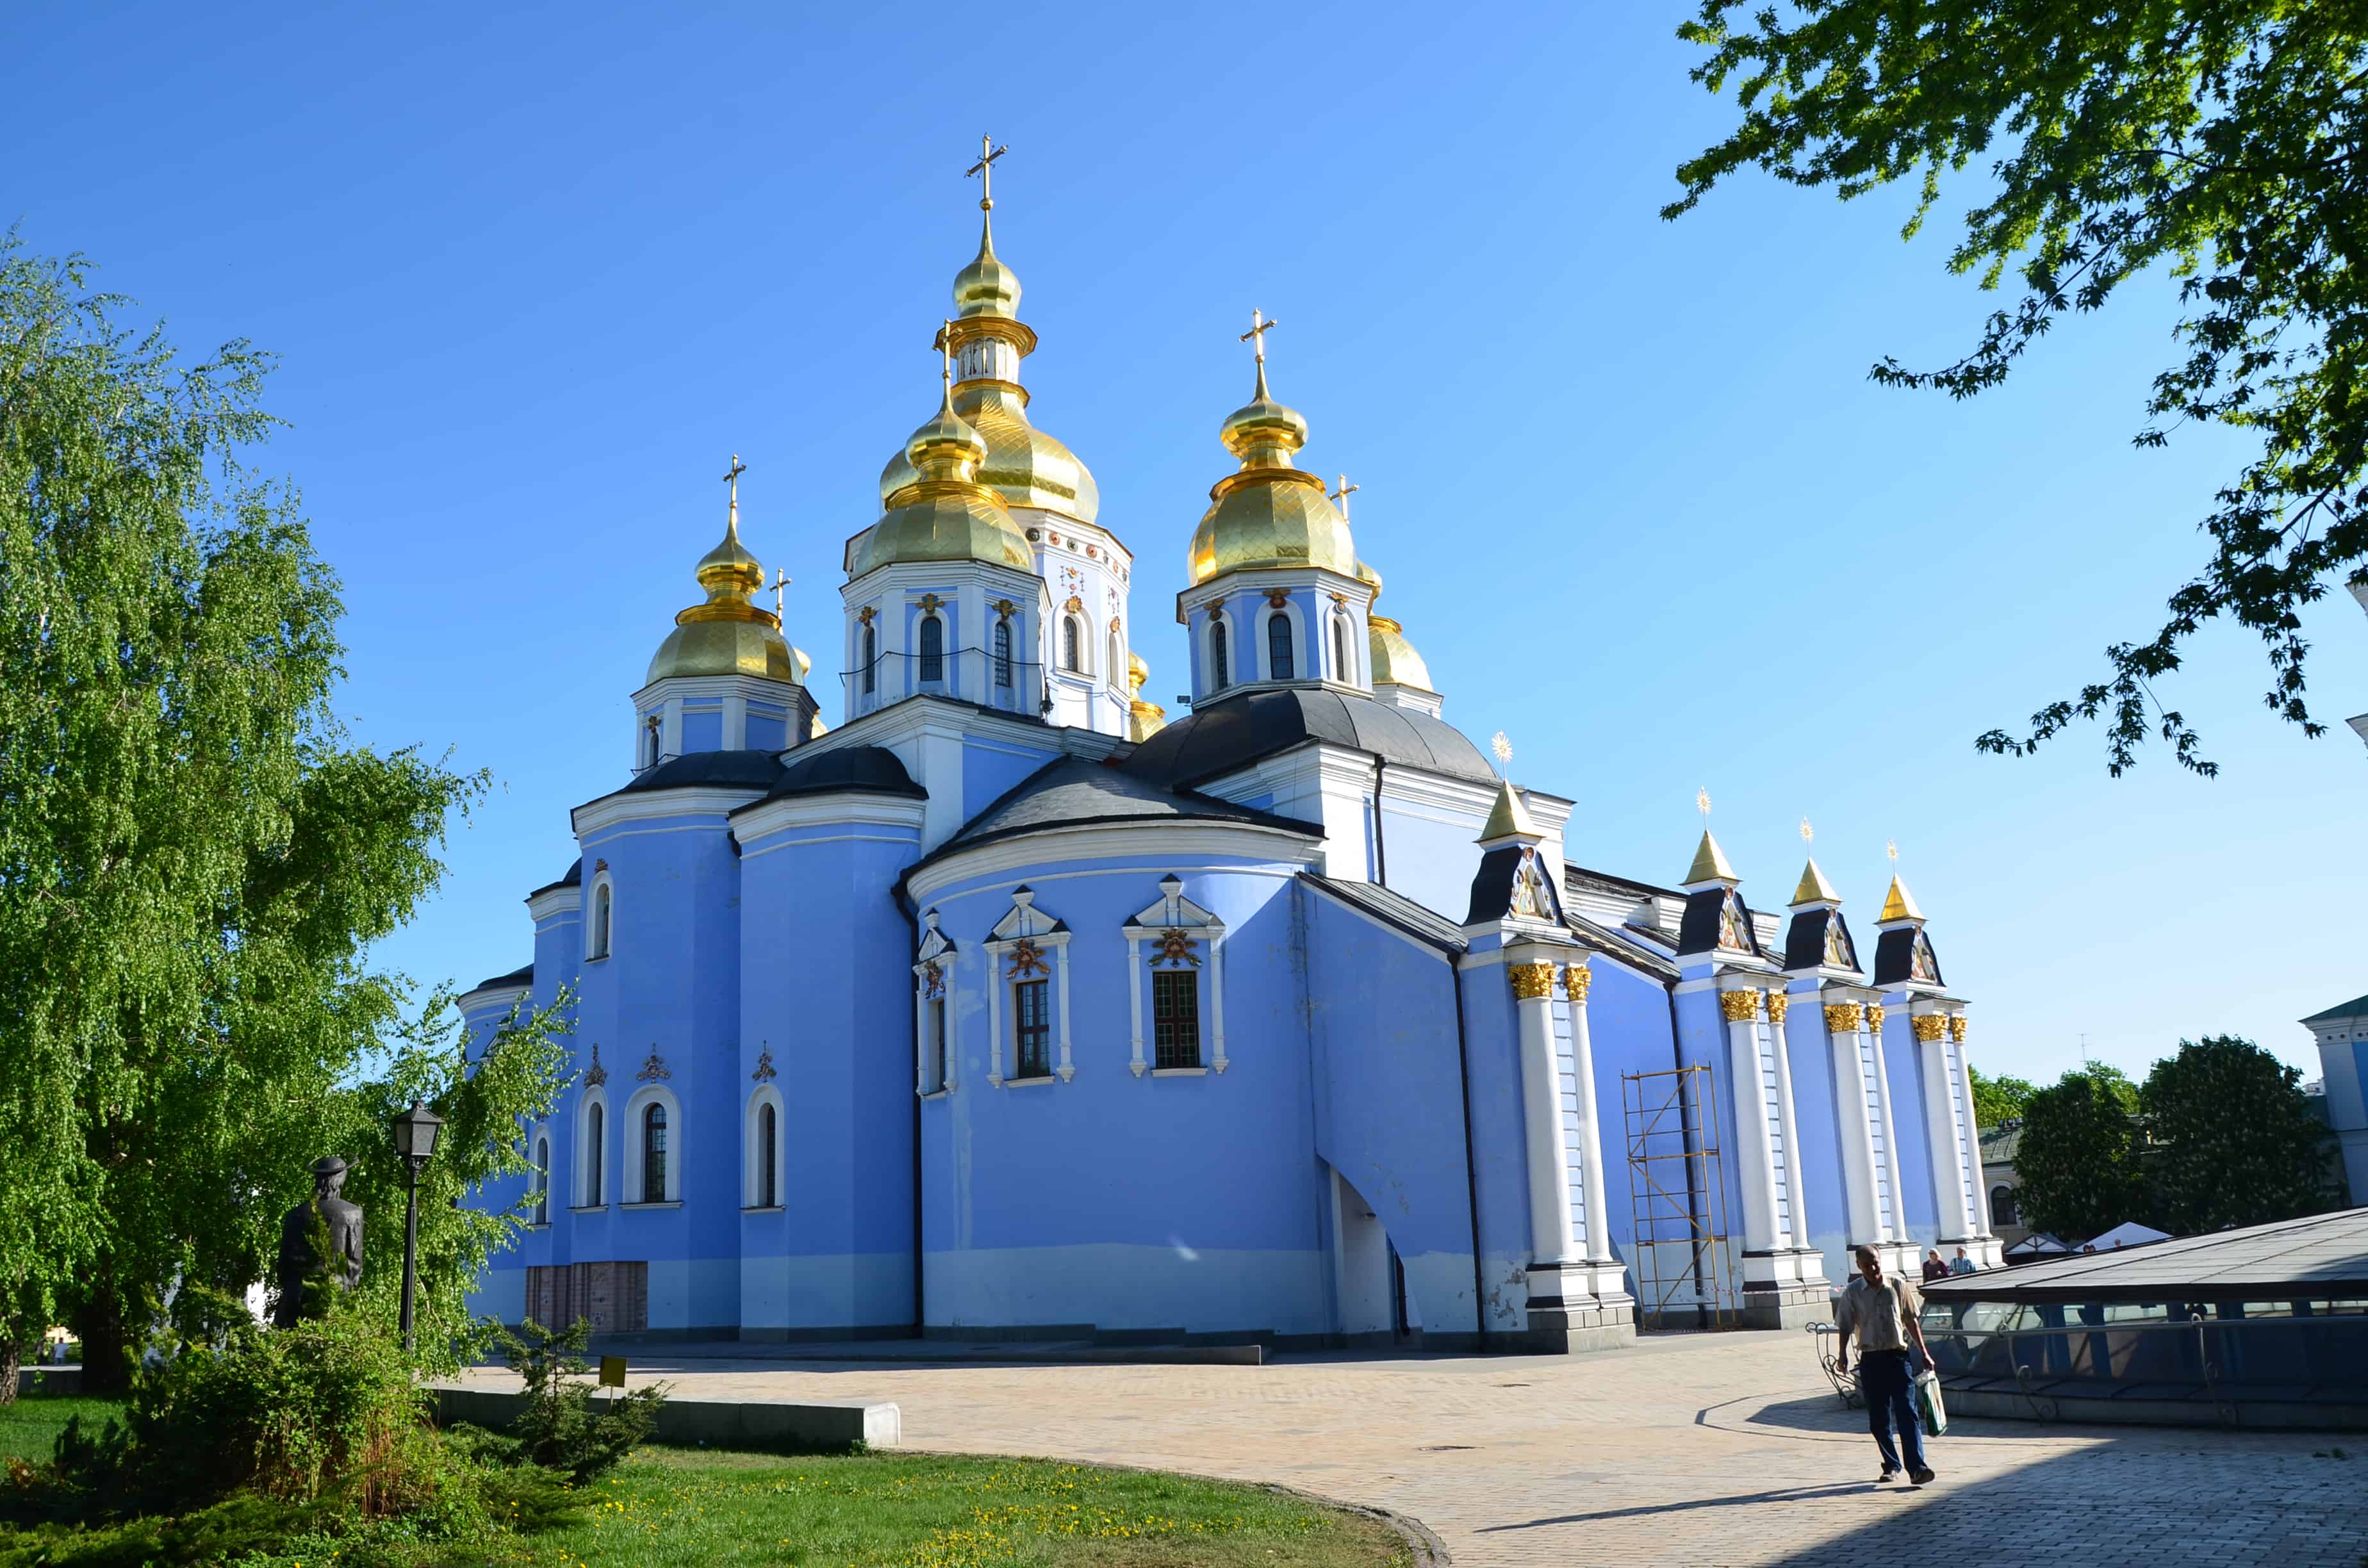 St. Michael's Golden-Domed Cathedral at St. Michael's Golden-Domed Monastery in Kyiv, Ukraine